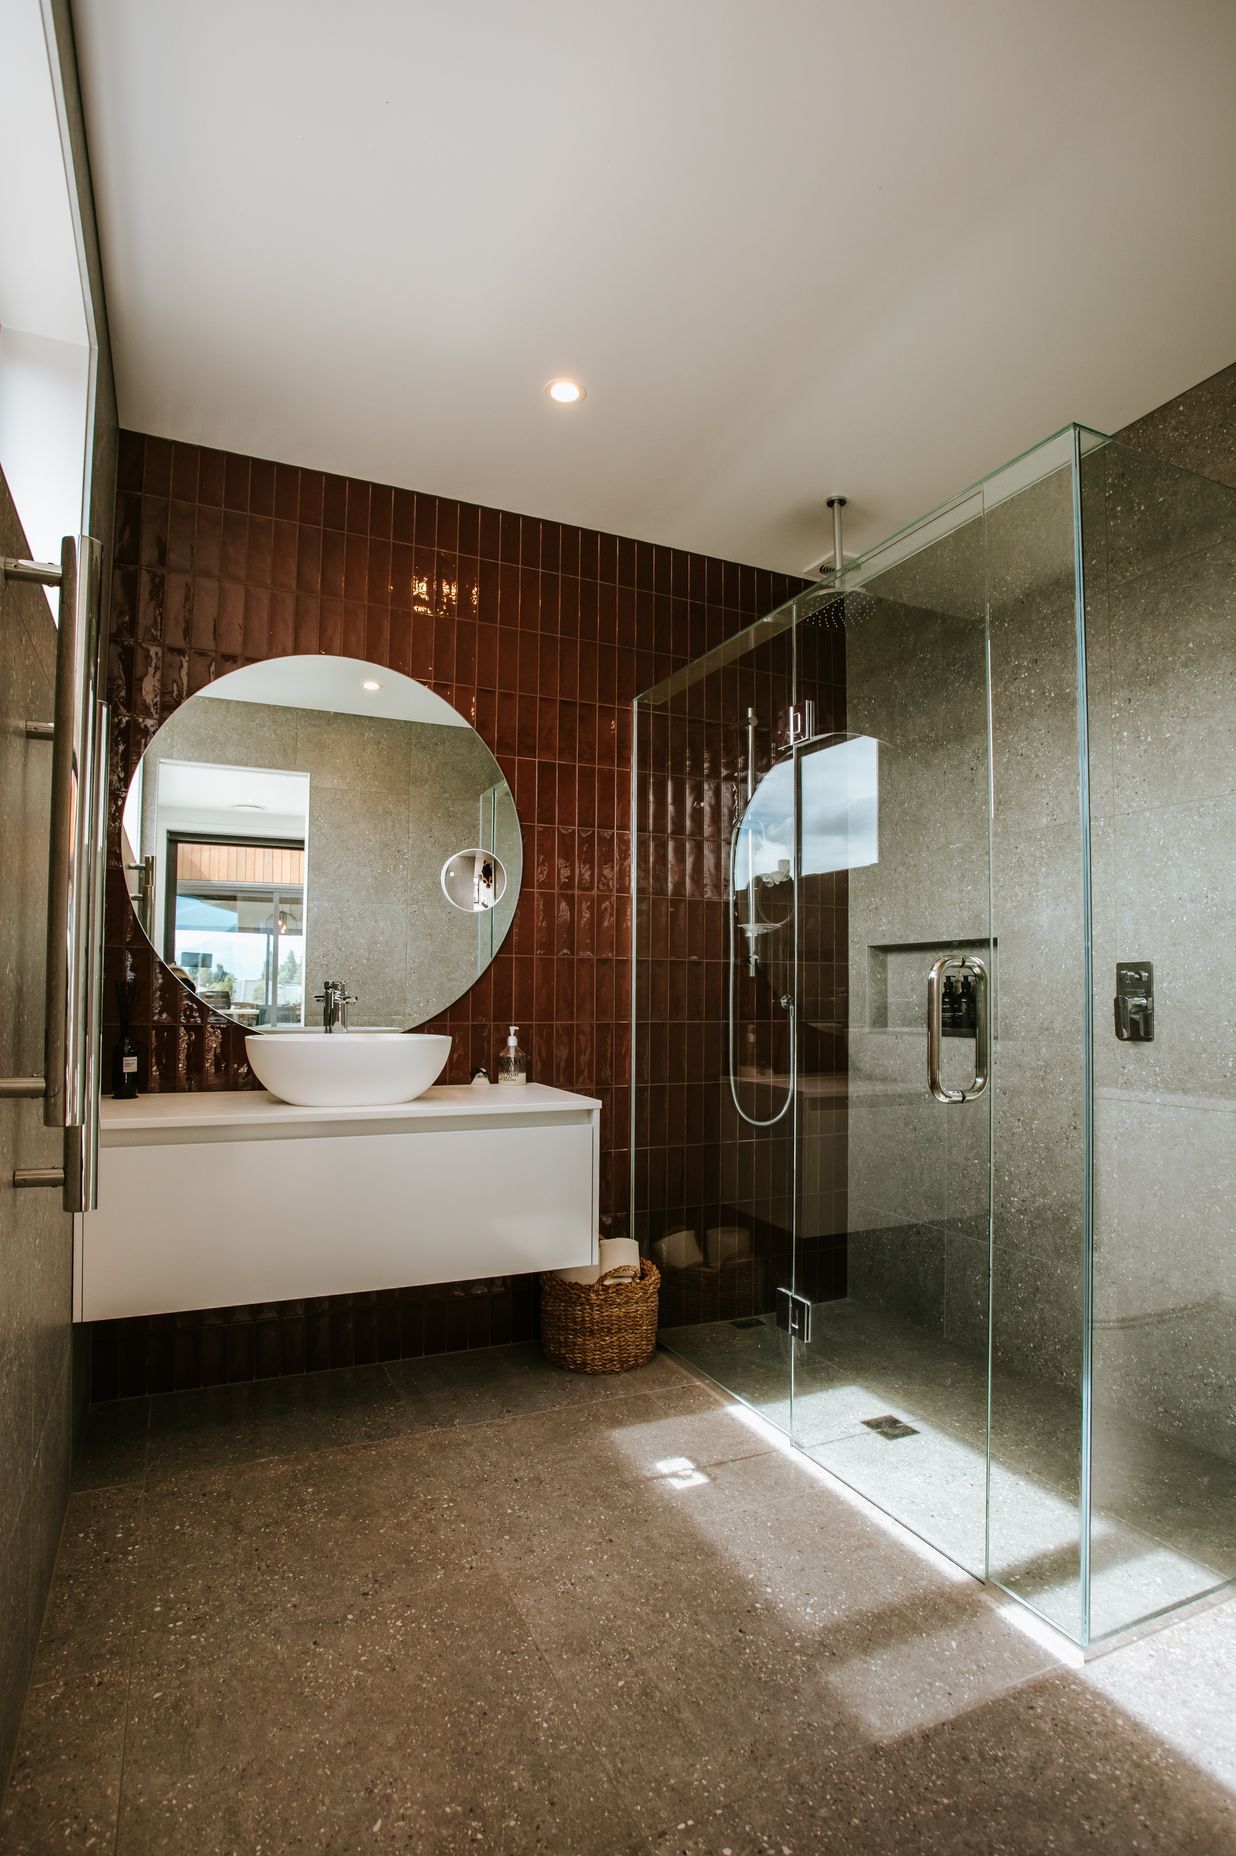 The fully tiled bathroom is a luxurious and sleek haven.